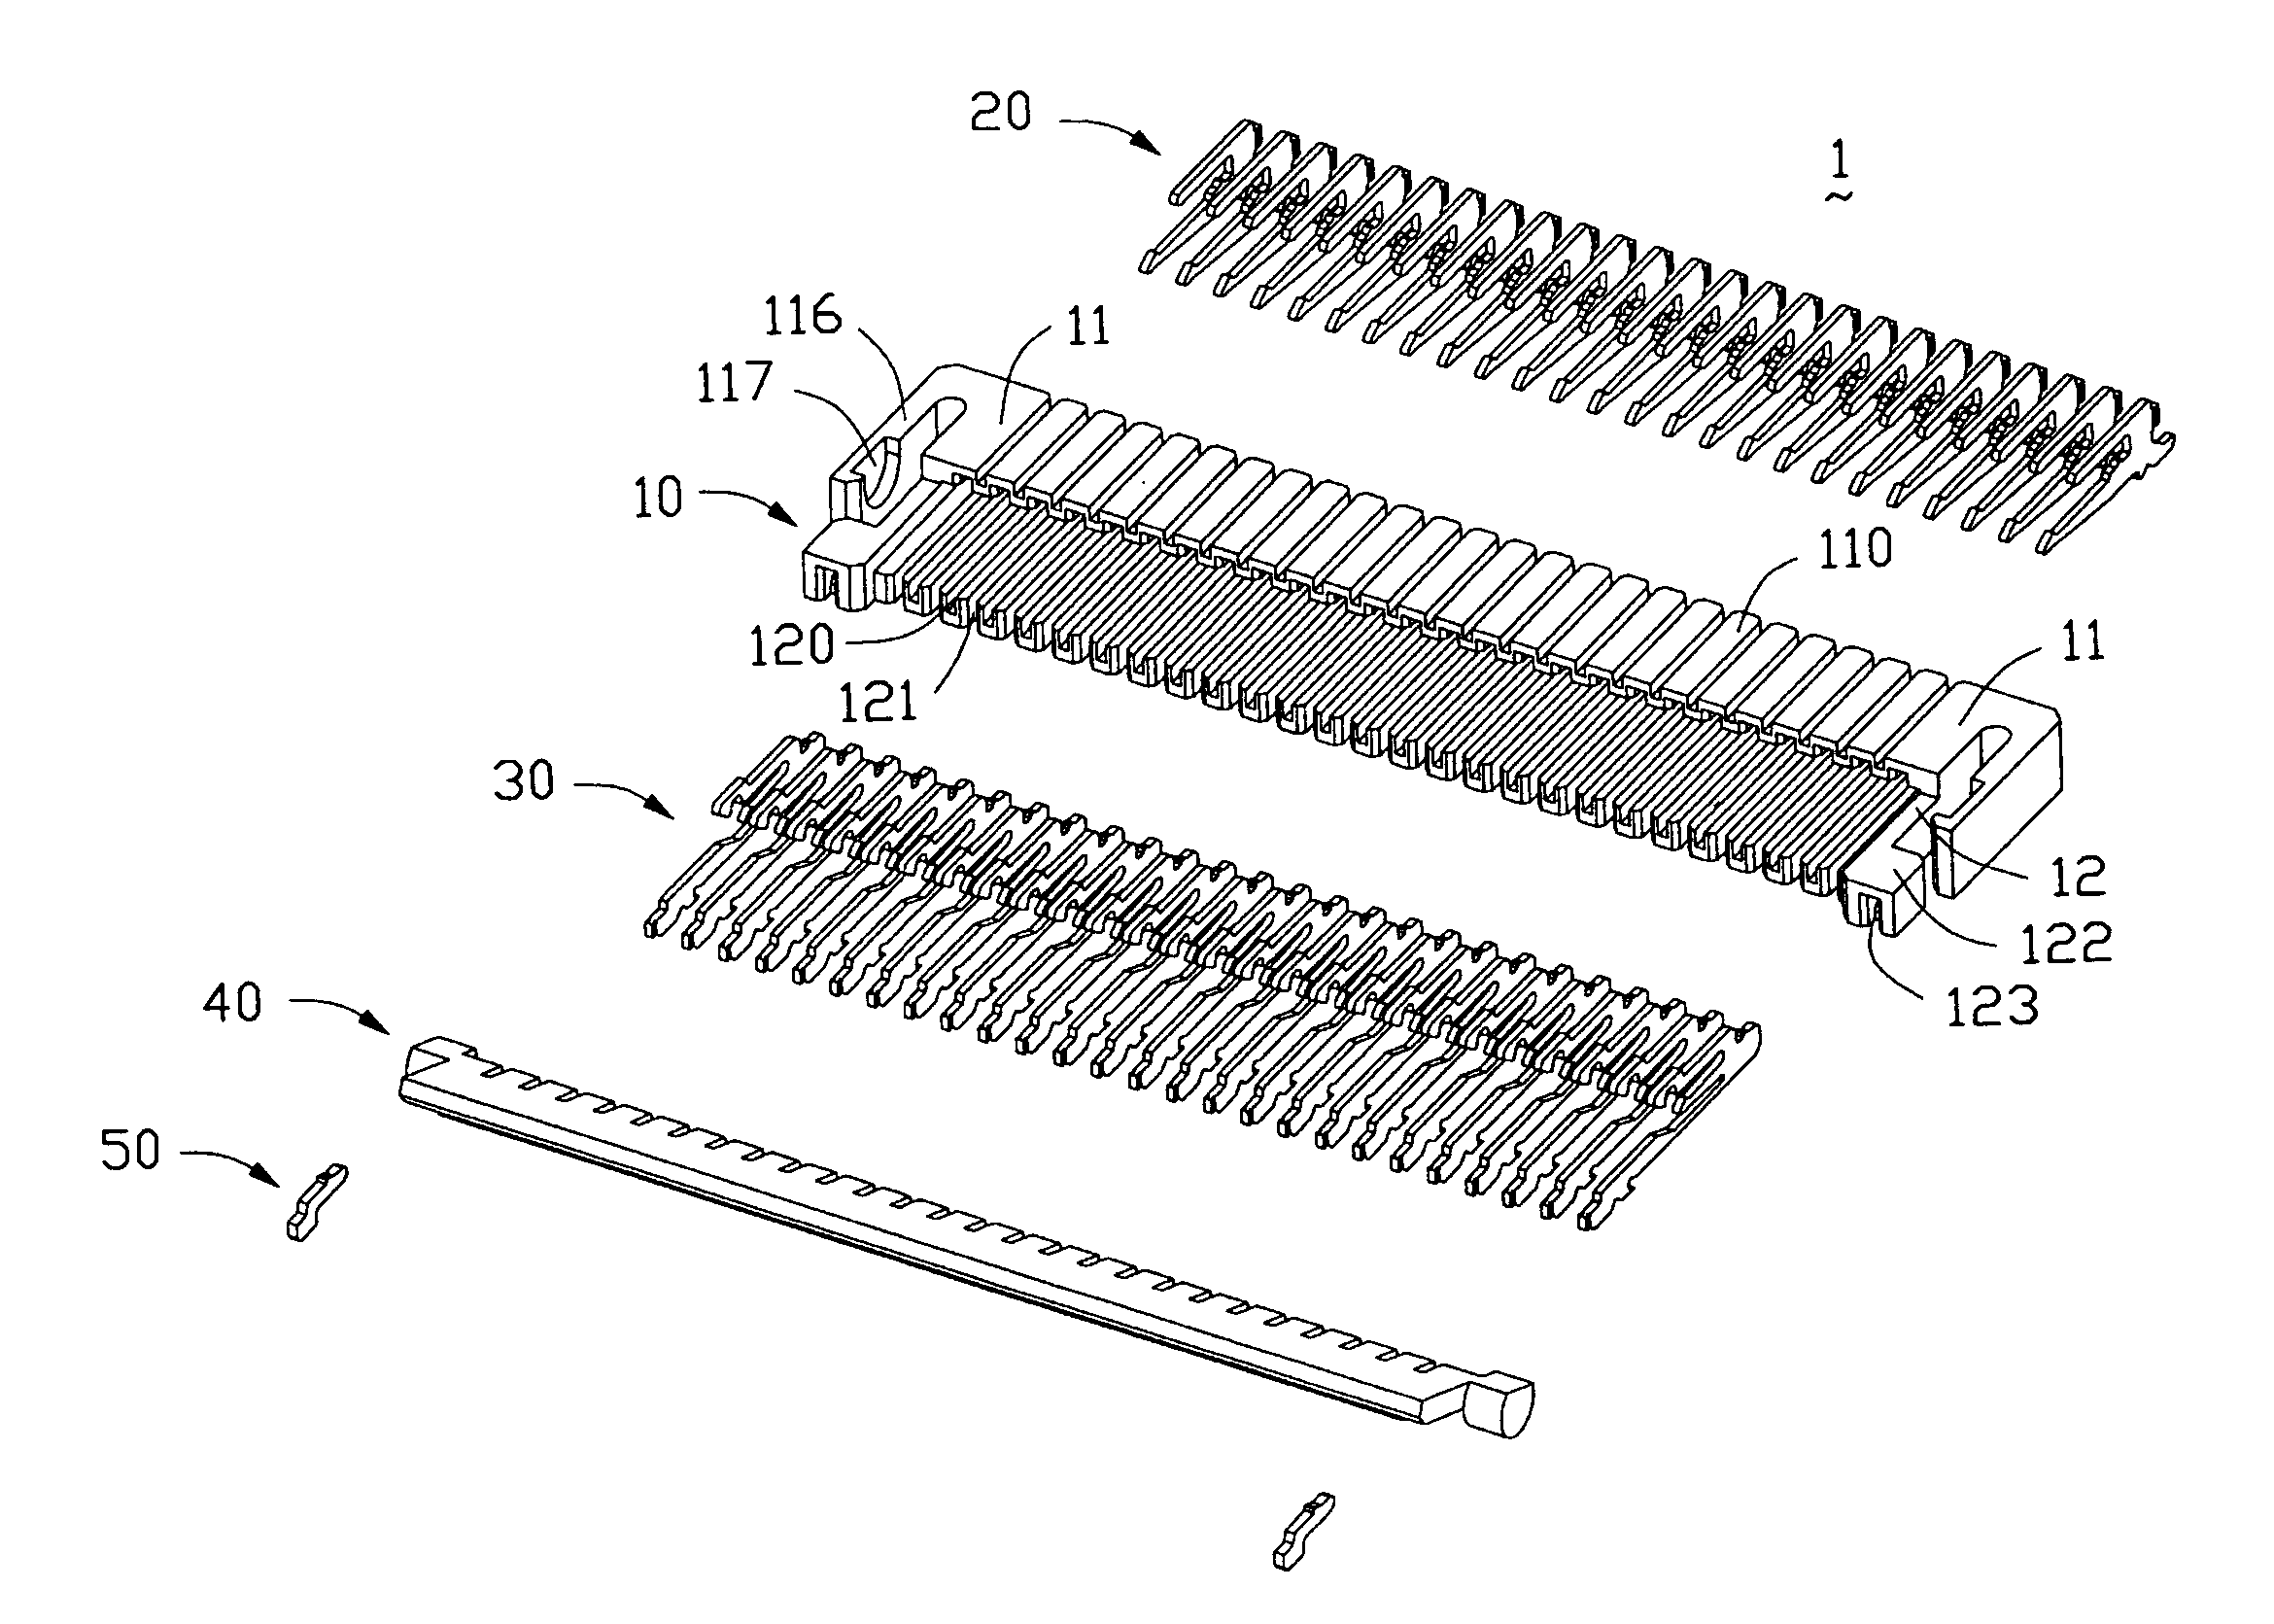 Electrical connector with improved actuator